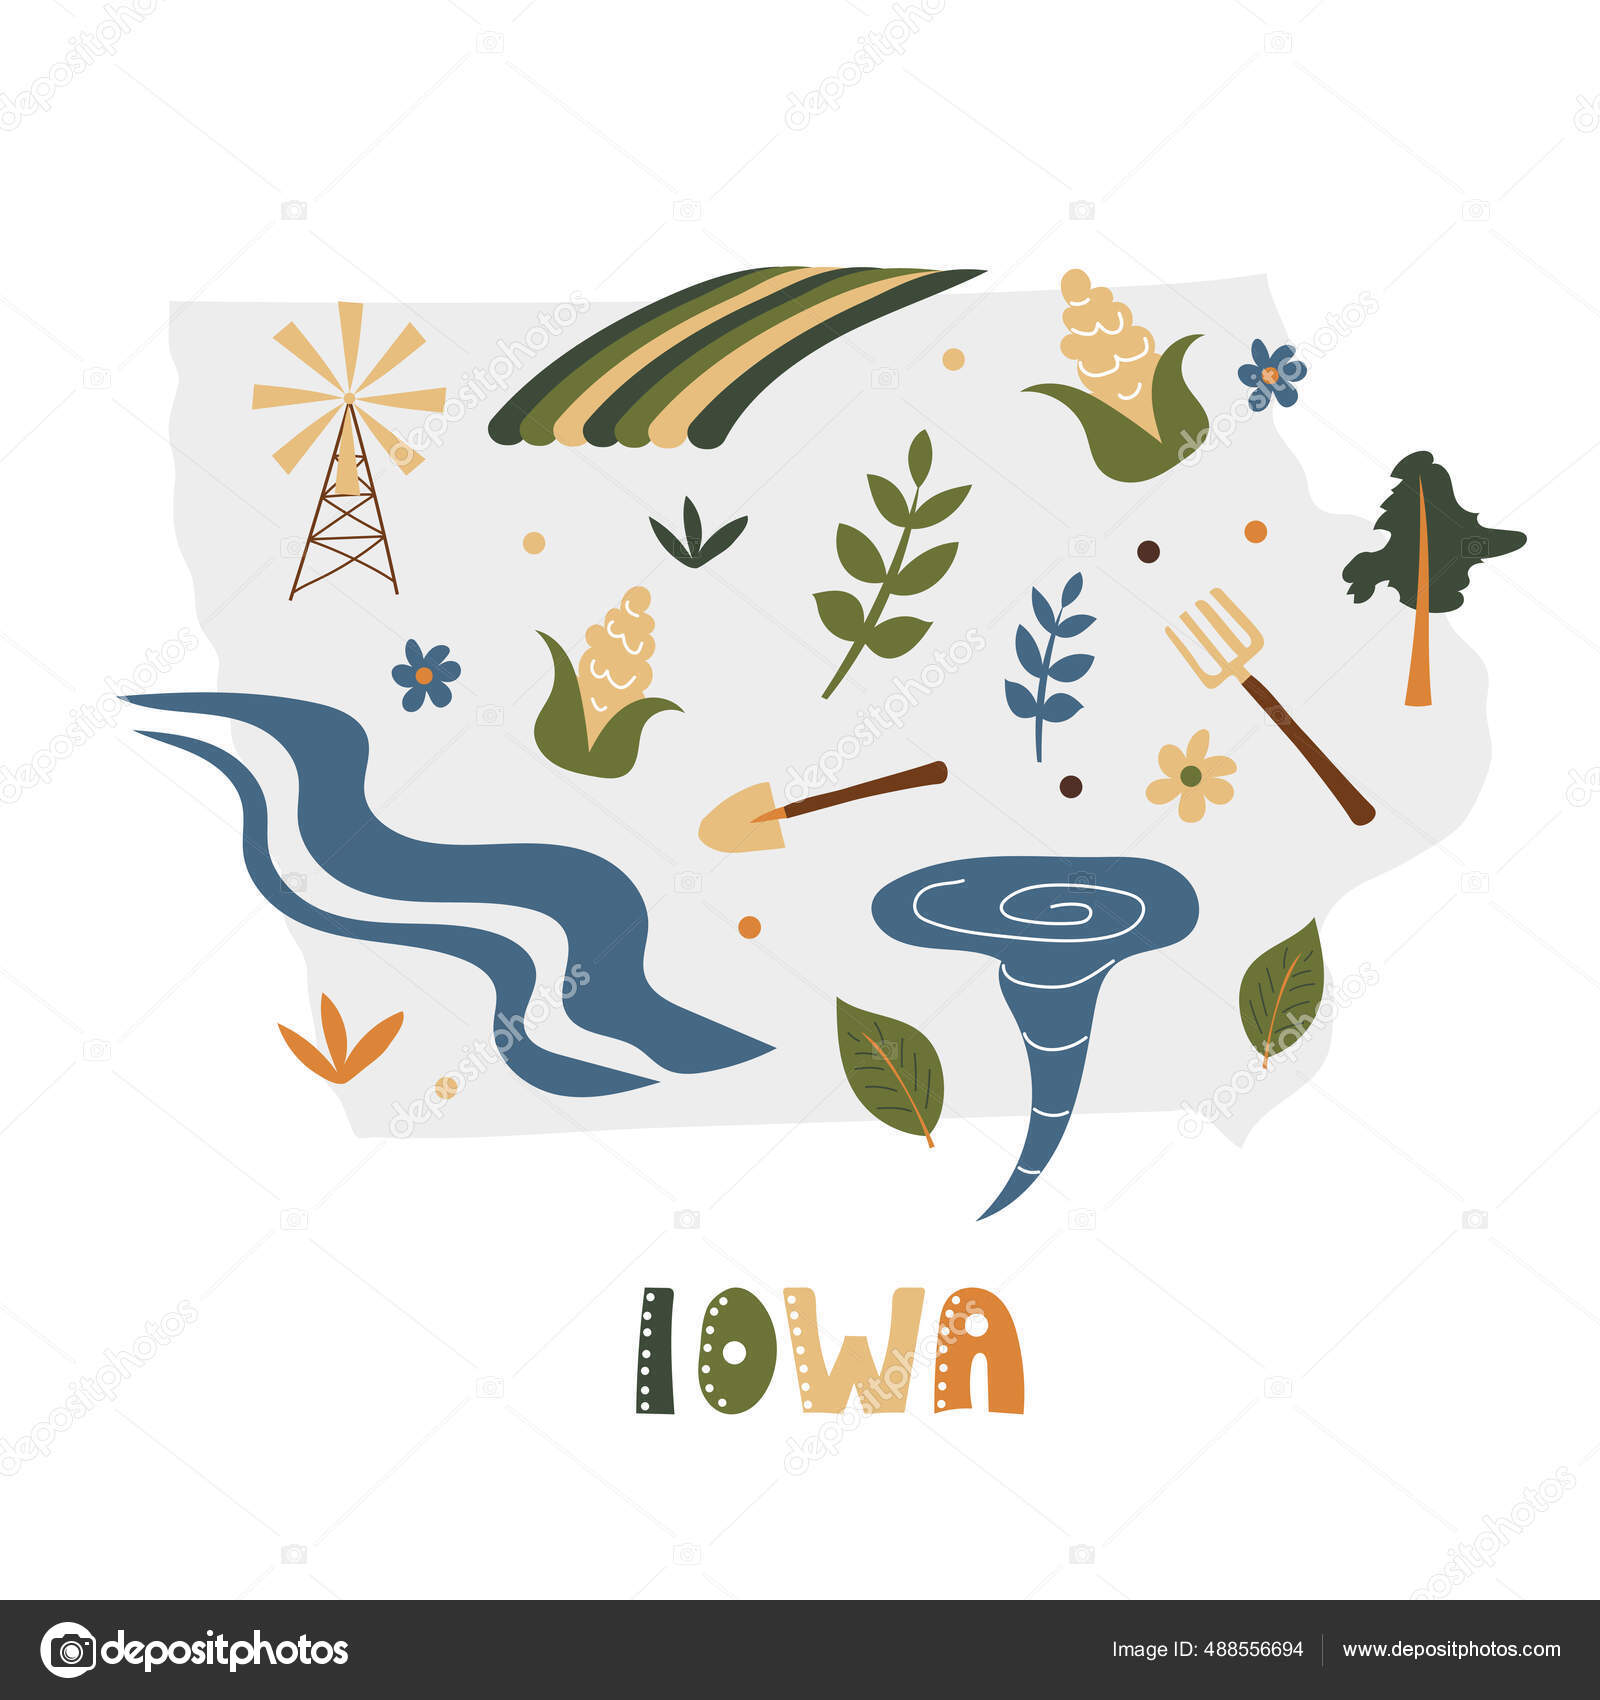 USA map collection. State symbols on gray state silhouette - Iowa Stock ...